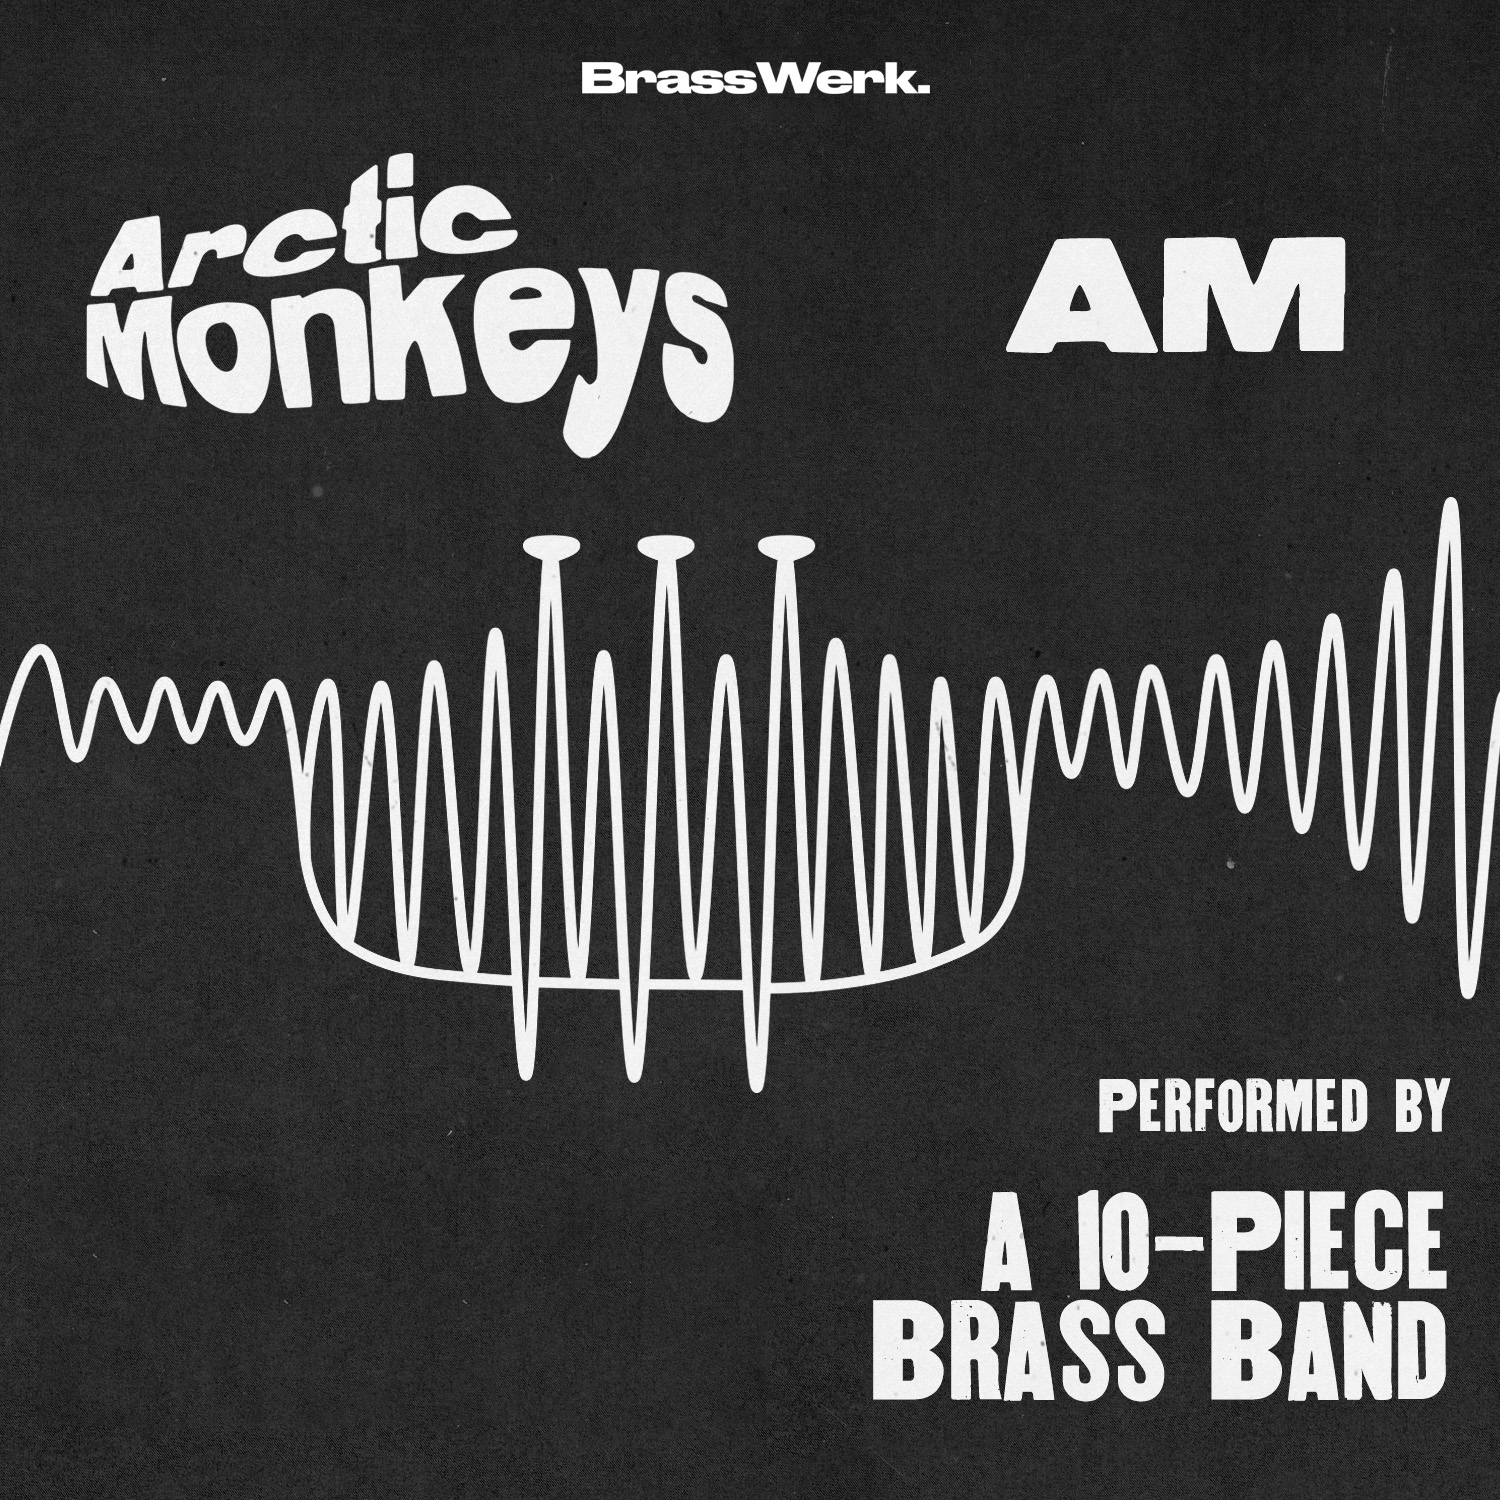 Arctic Monkeys on Brass (AM) at The Blues Kitchen Manchester, Manchester